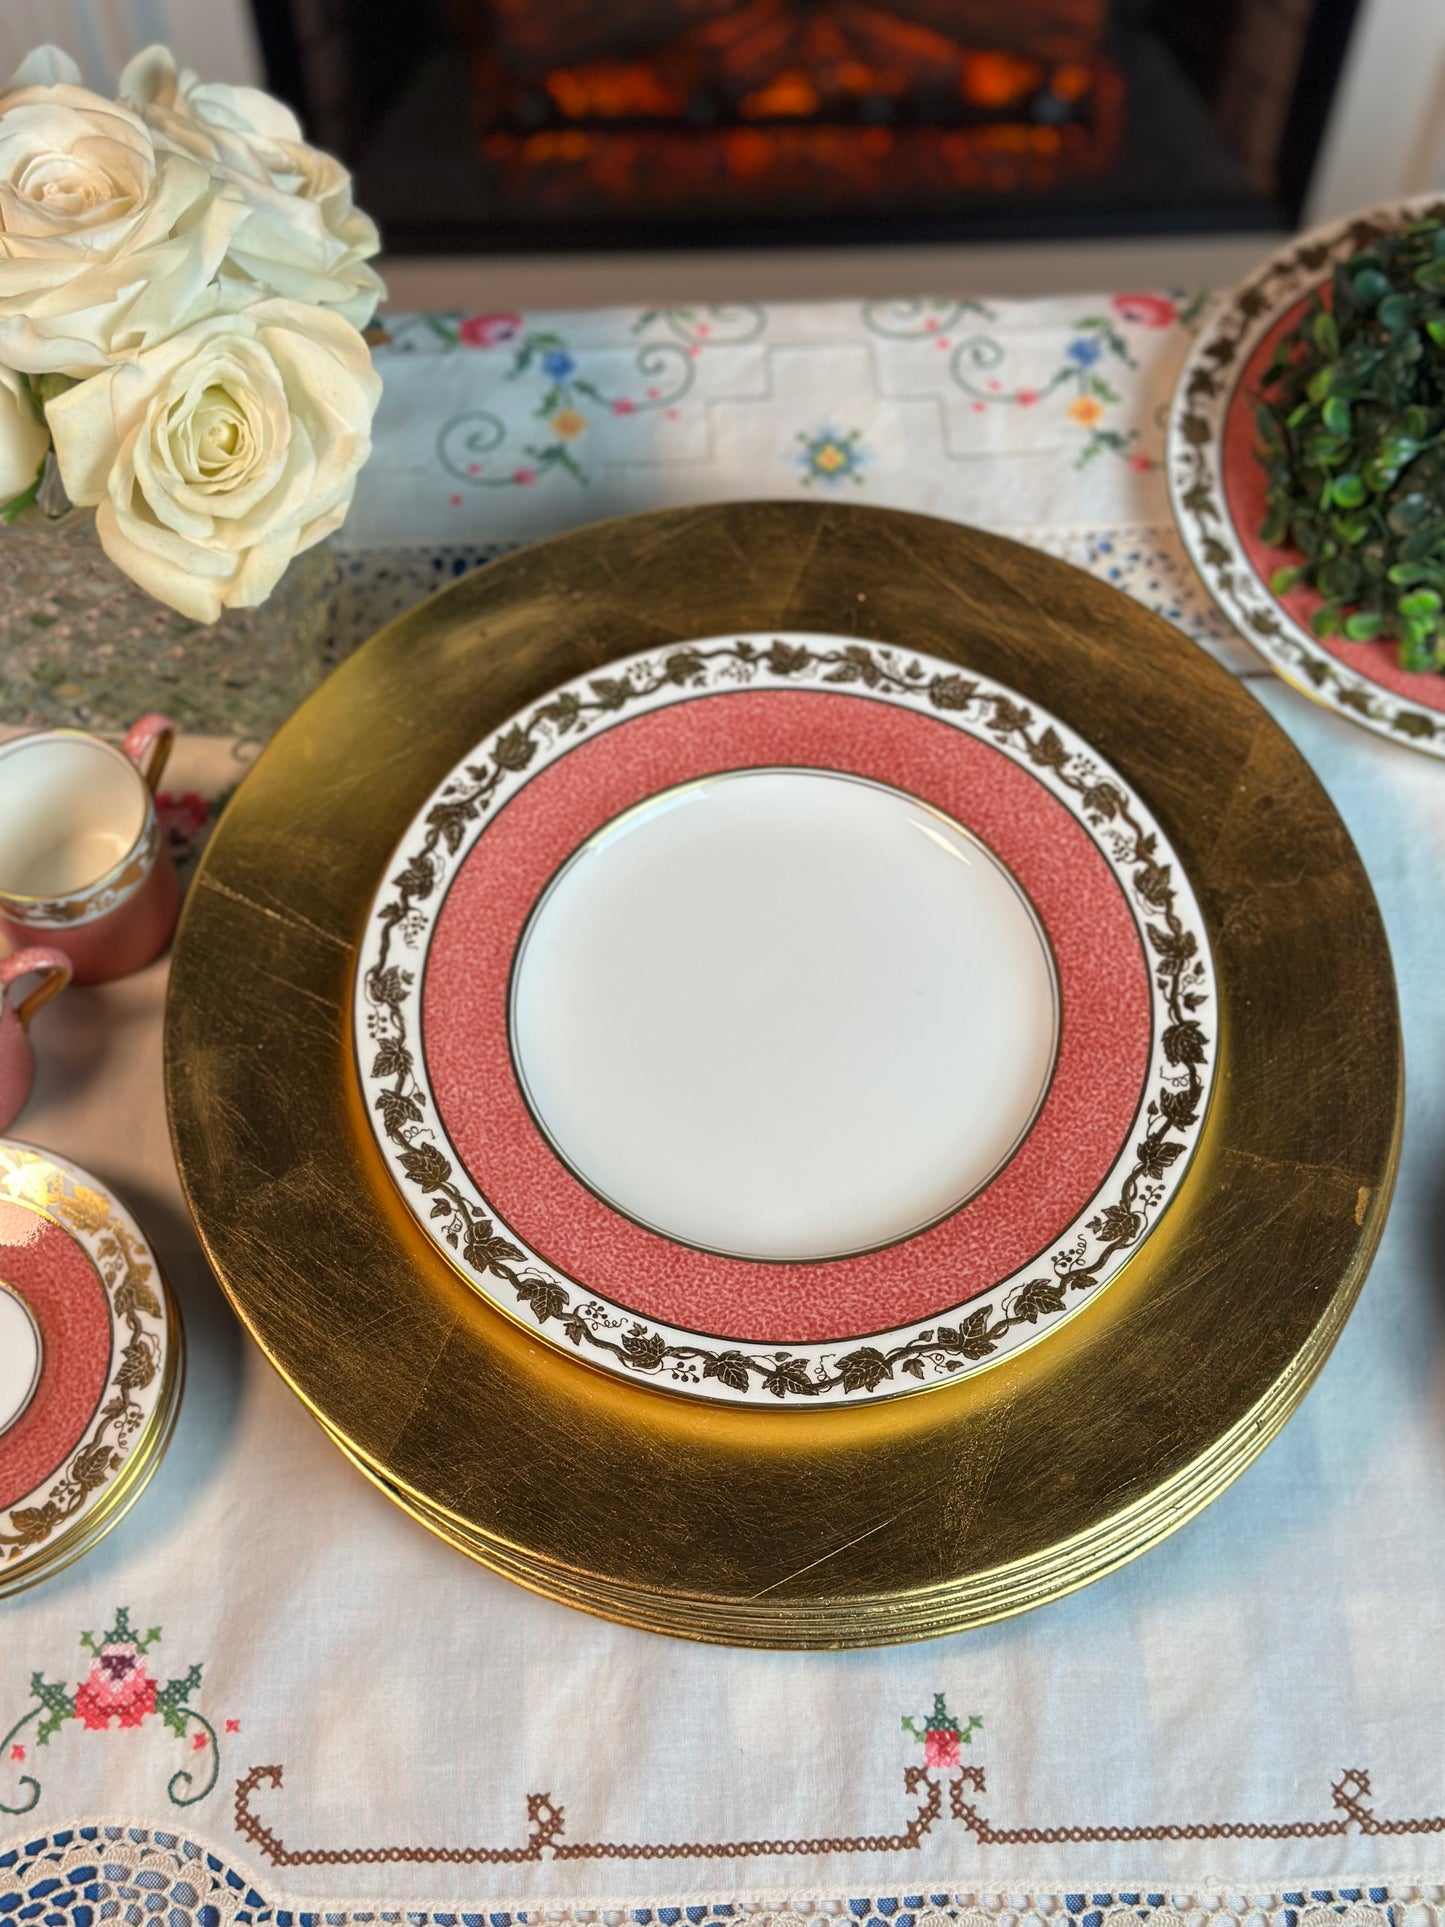 Fabulous Set (6) Melamine Gold Chargers, Bloomingdale’s, 12”D - Pristine!